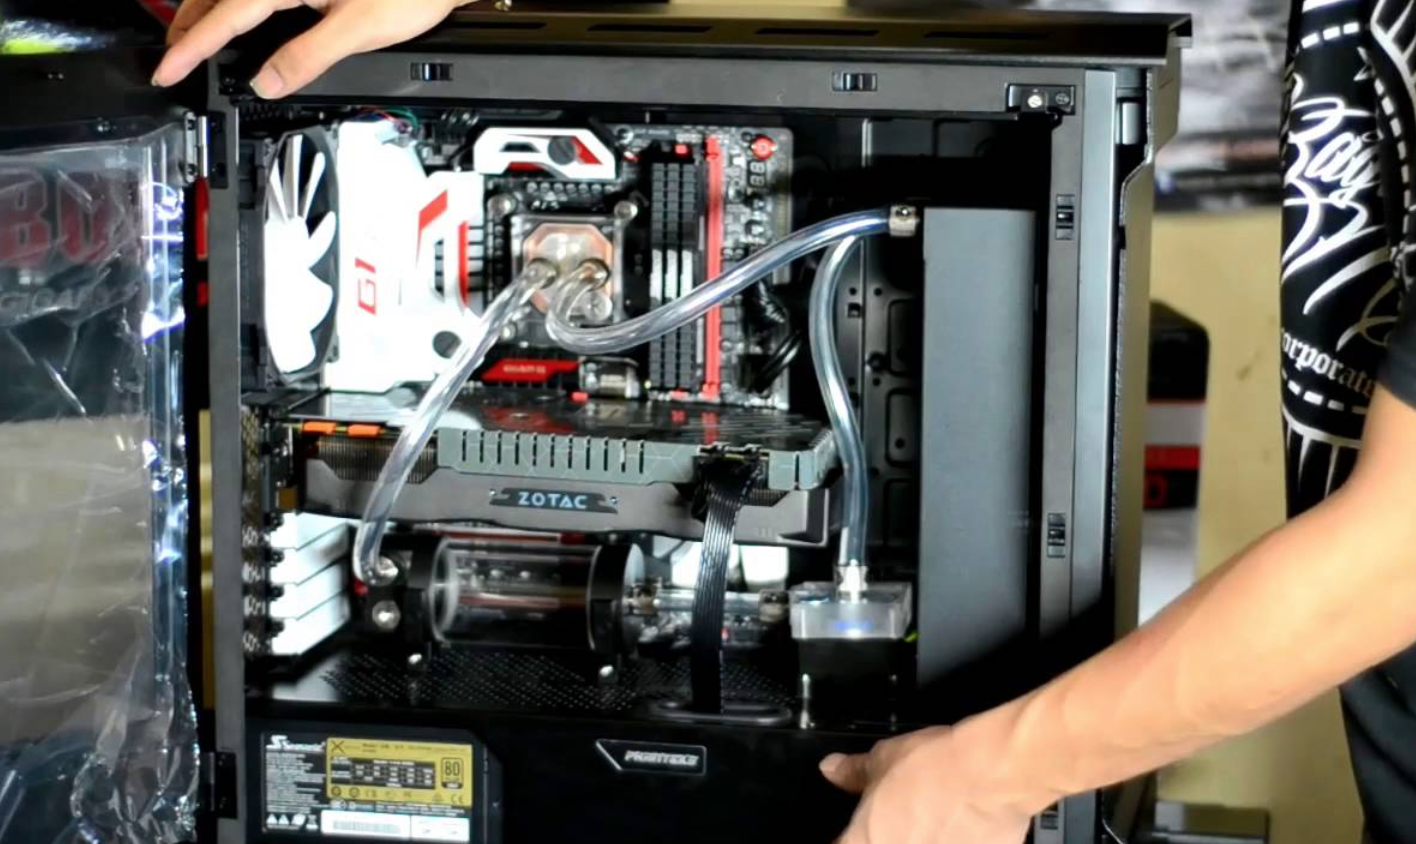 What’s the Difference Between E-ATX, ATX, Micro-ATX and Mini-ITX?